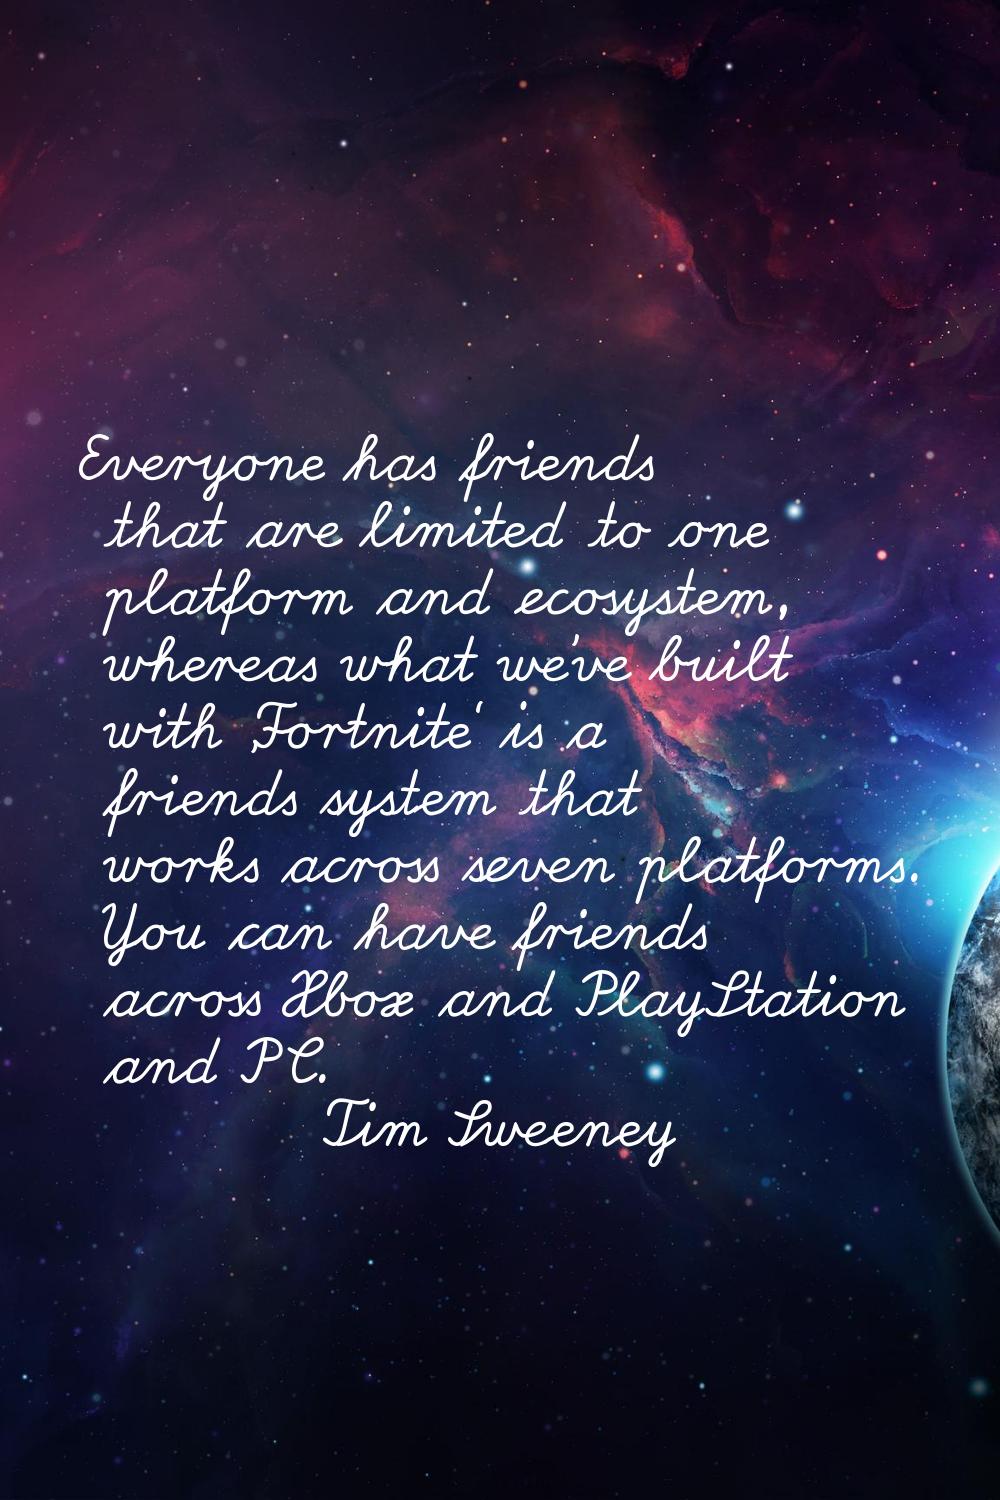 Everyone has friends that are limited to one platform and ecosystem, whereas what we've built with 